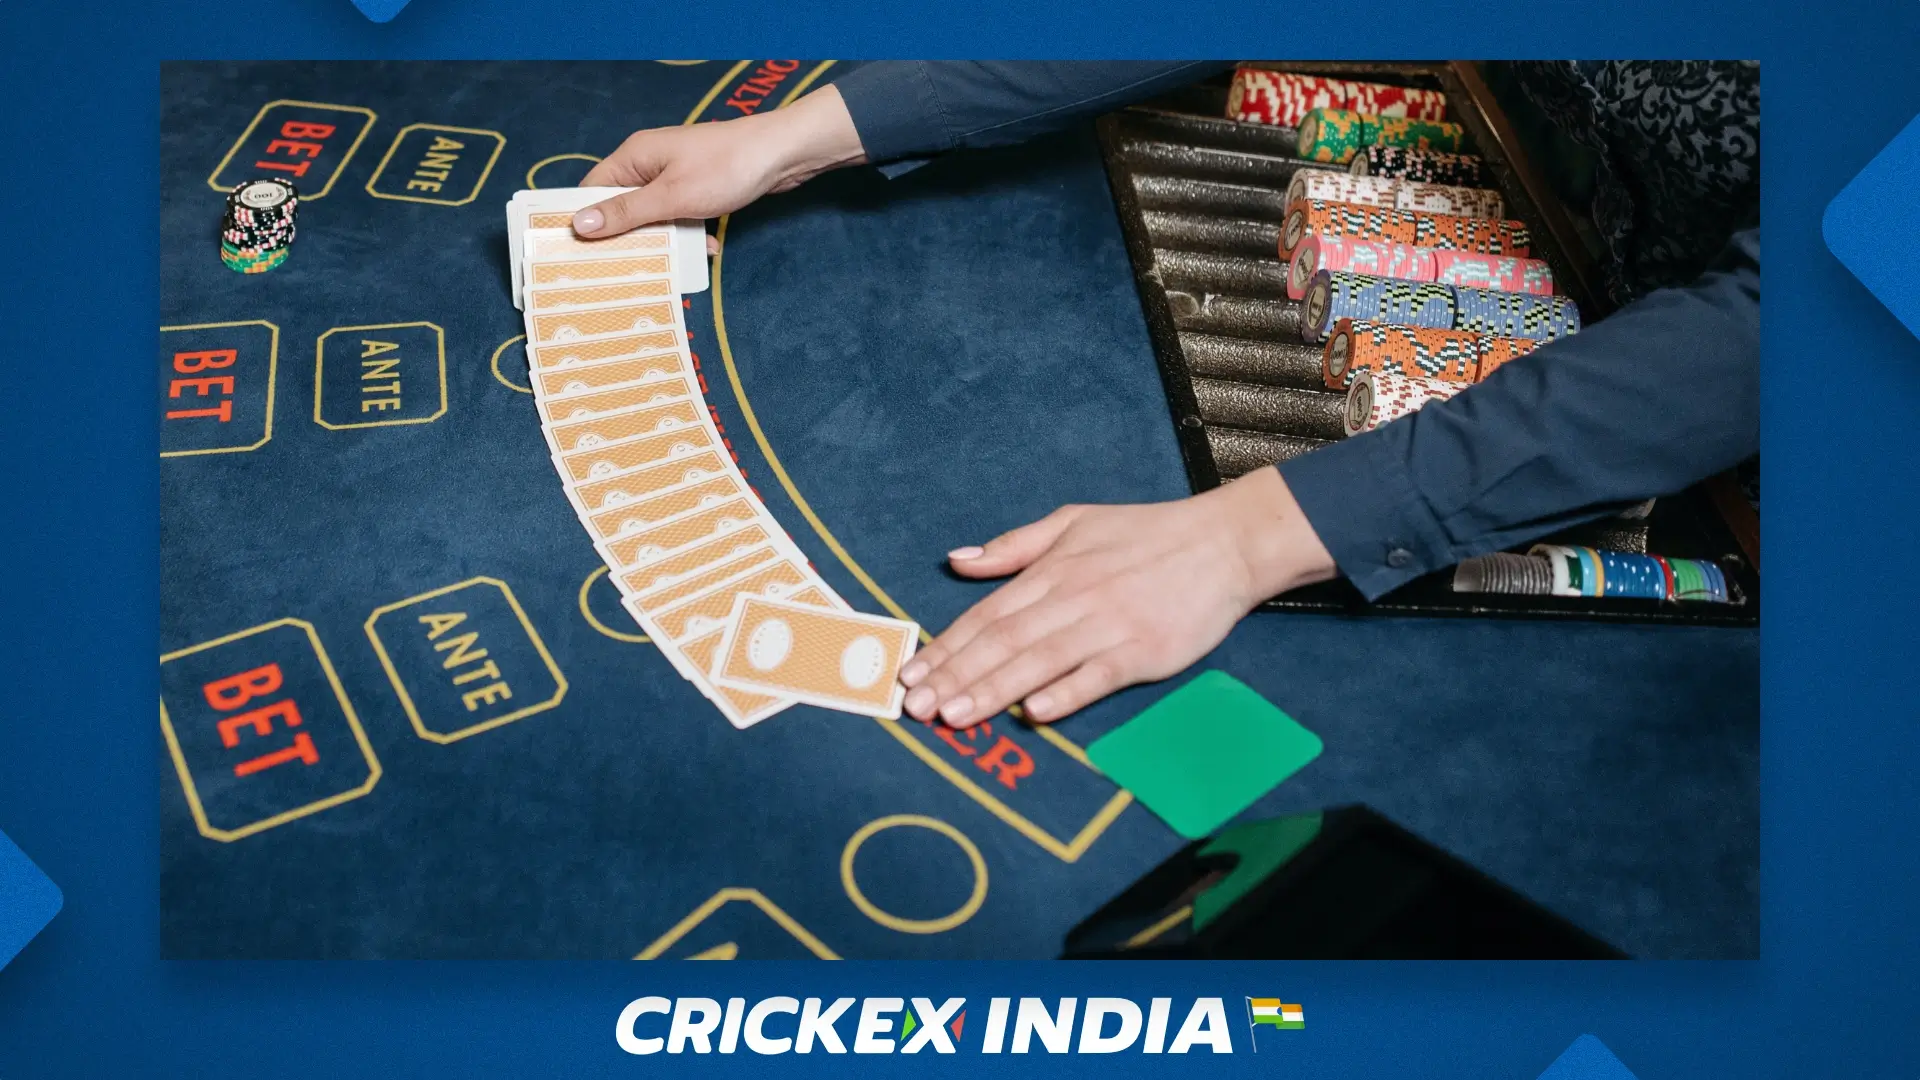 Sexy baccarat and cashback promotion at Crickex casino